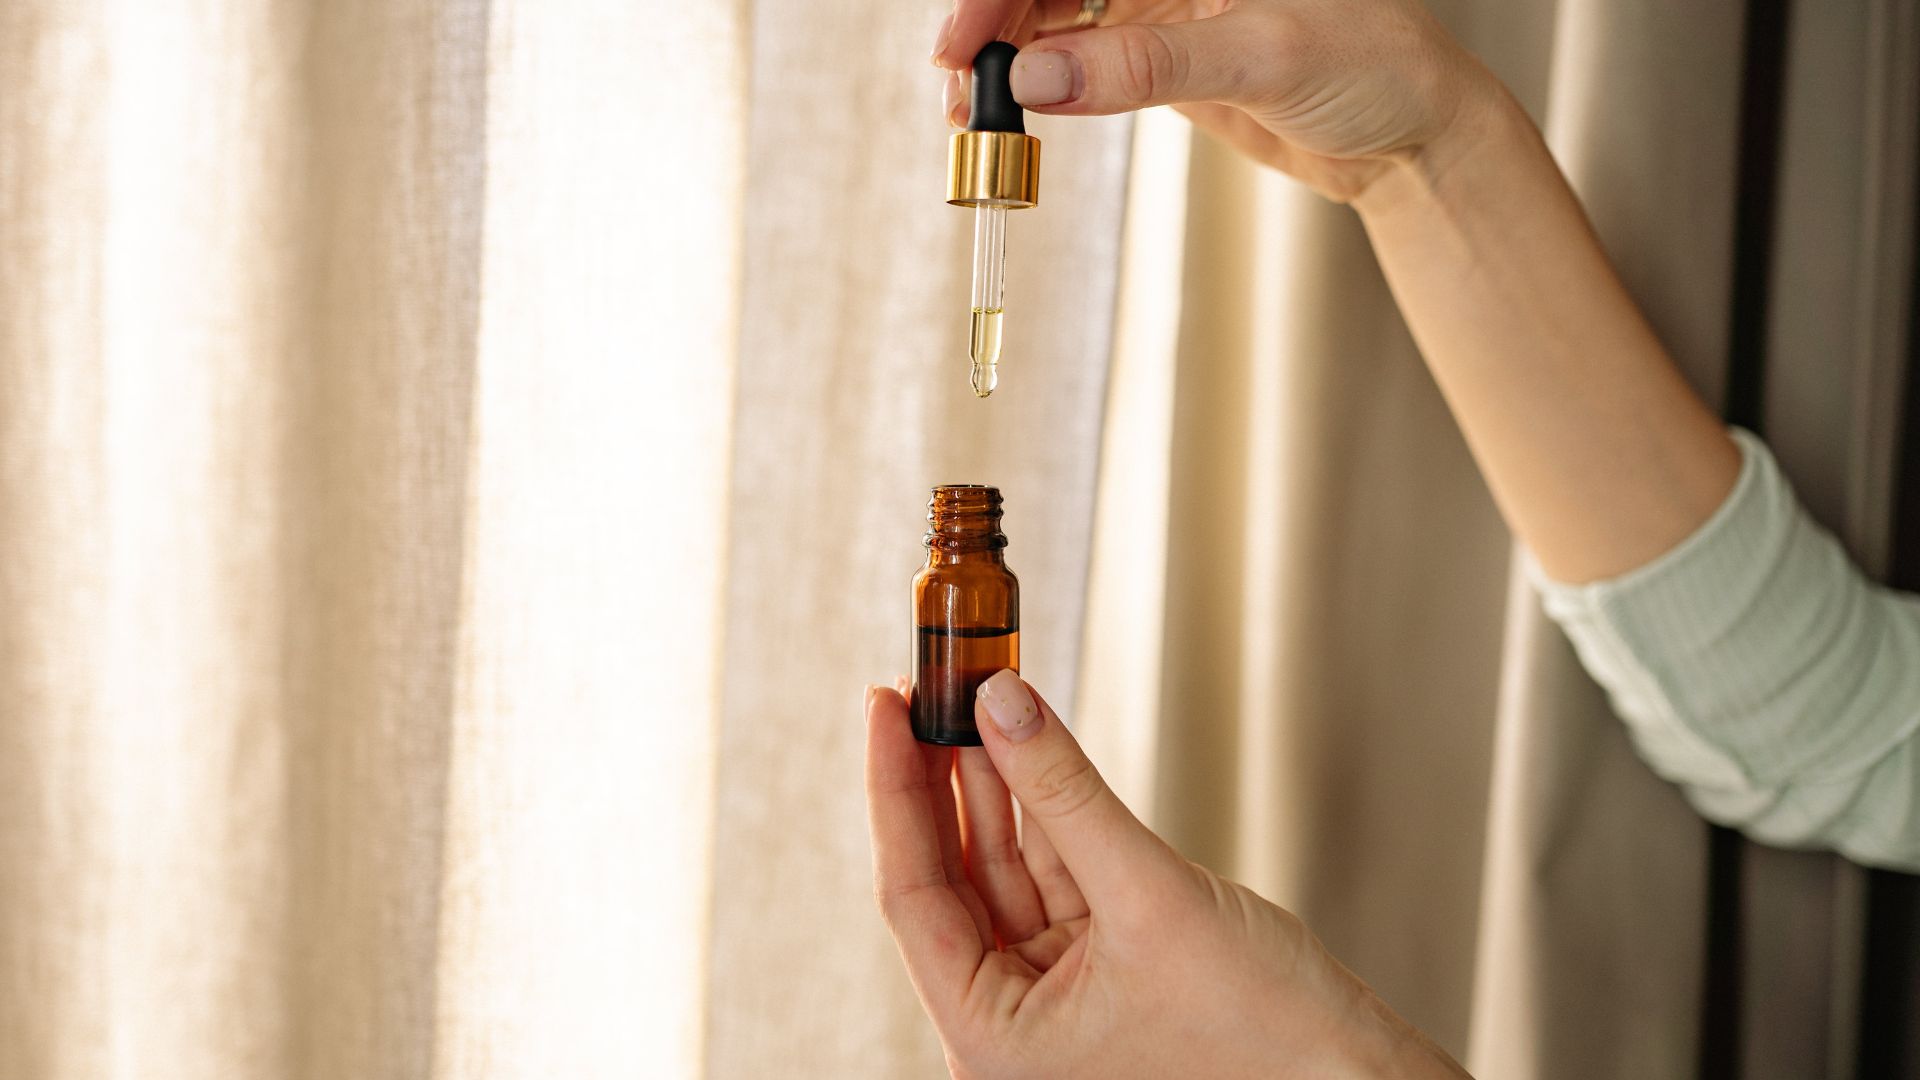 A person holds a tincture bottle and dropper in front of a window with drapes.